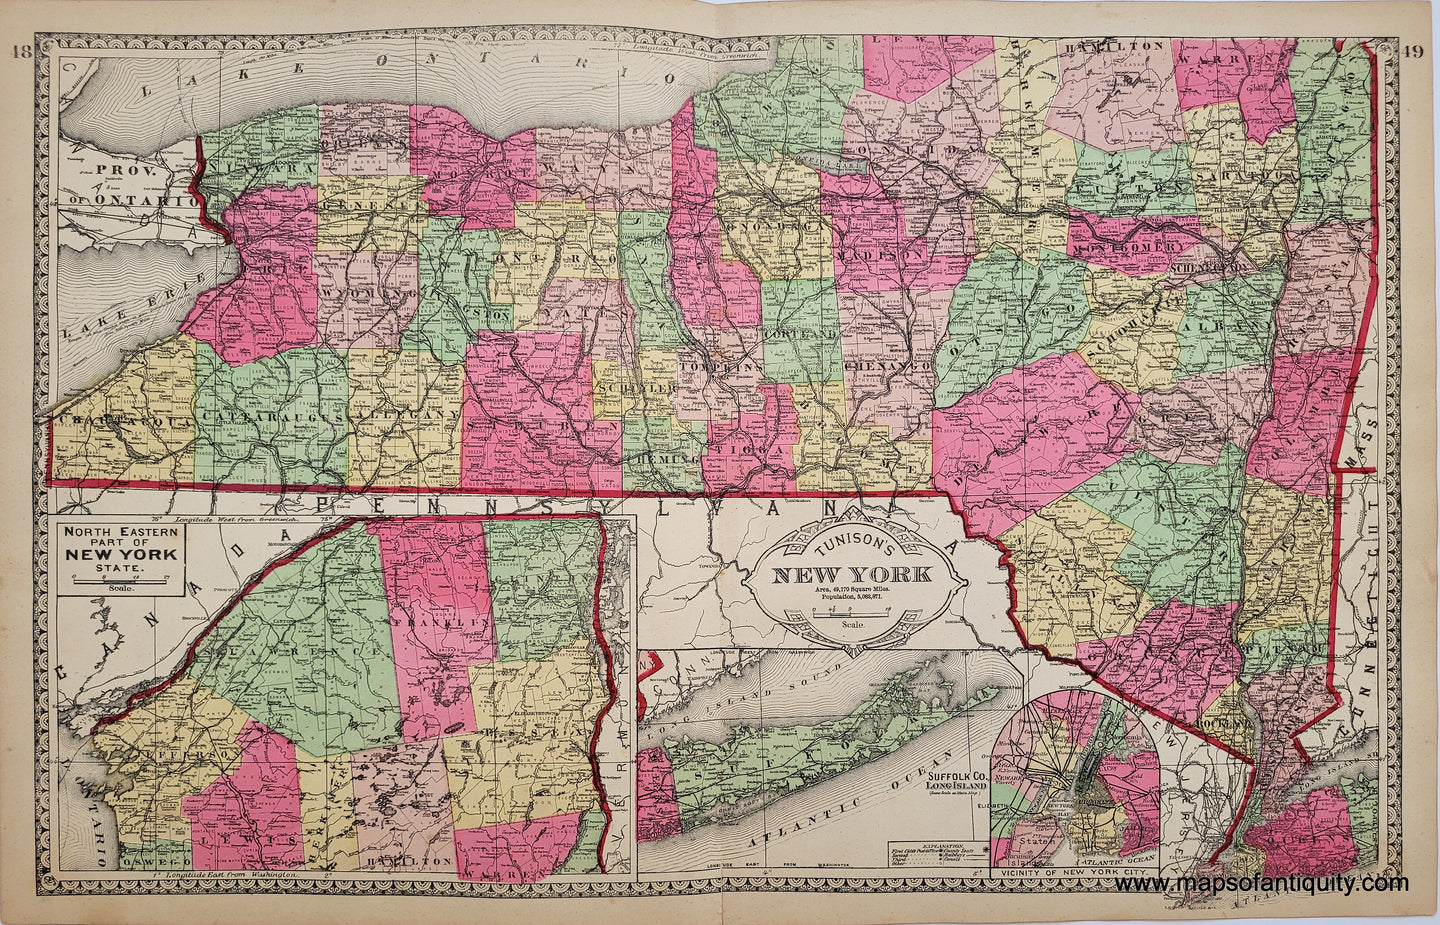 Antique double-sided sheet from Tunison's Peerless Universal Atlas of the World, 1887 by H.C. Tunison. On one side is a map of Virginia, West Virginia, Maryland, Delaware, and DC with an inset of part of Virginia, the centerfold of the page is a map of New York, and on the other side is a map showing the new Standard Time Zones and state seals. Decorative border and cartouche. Vibrant original color. 